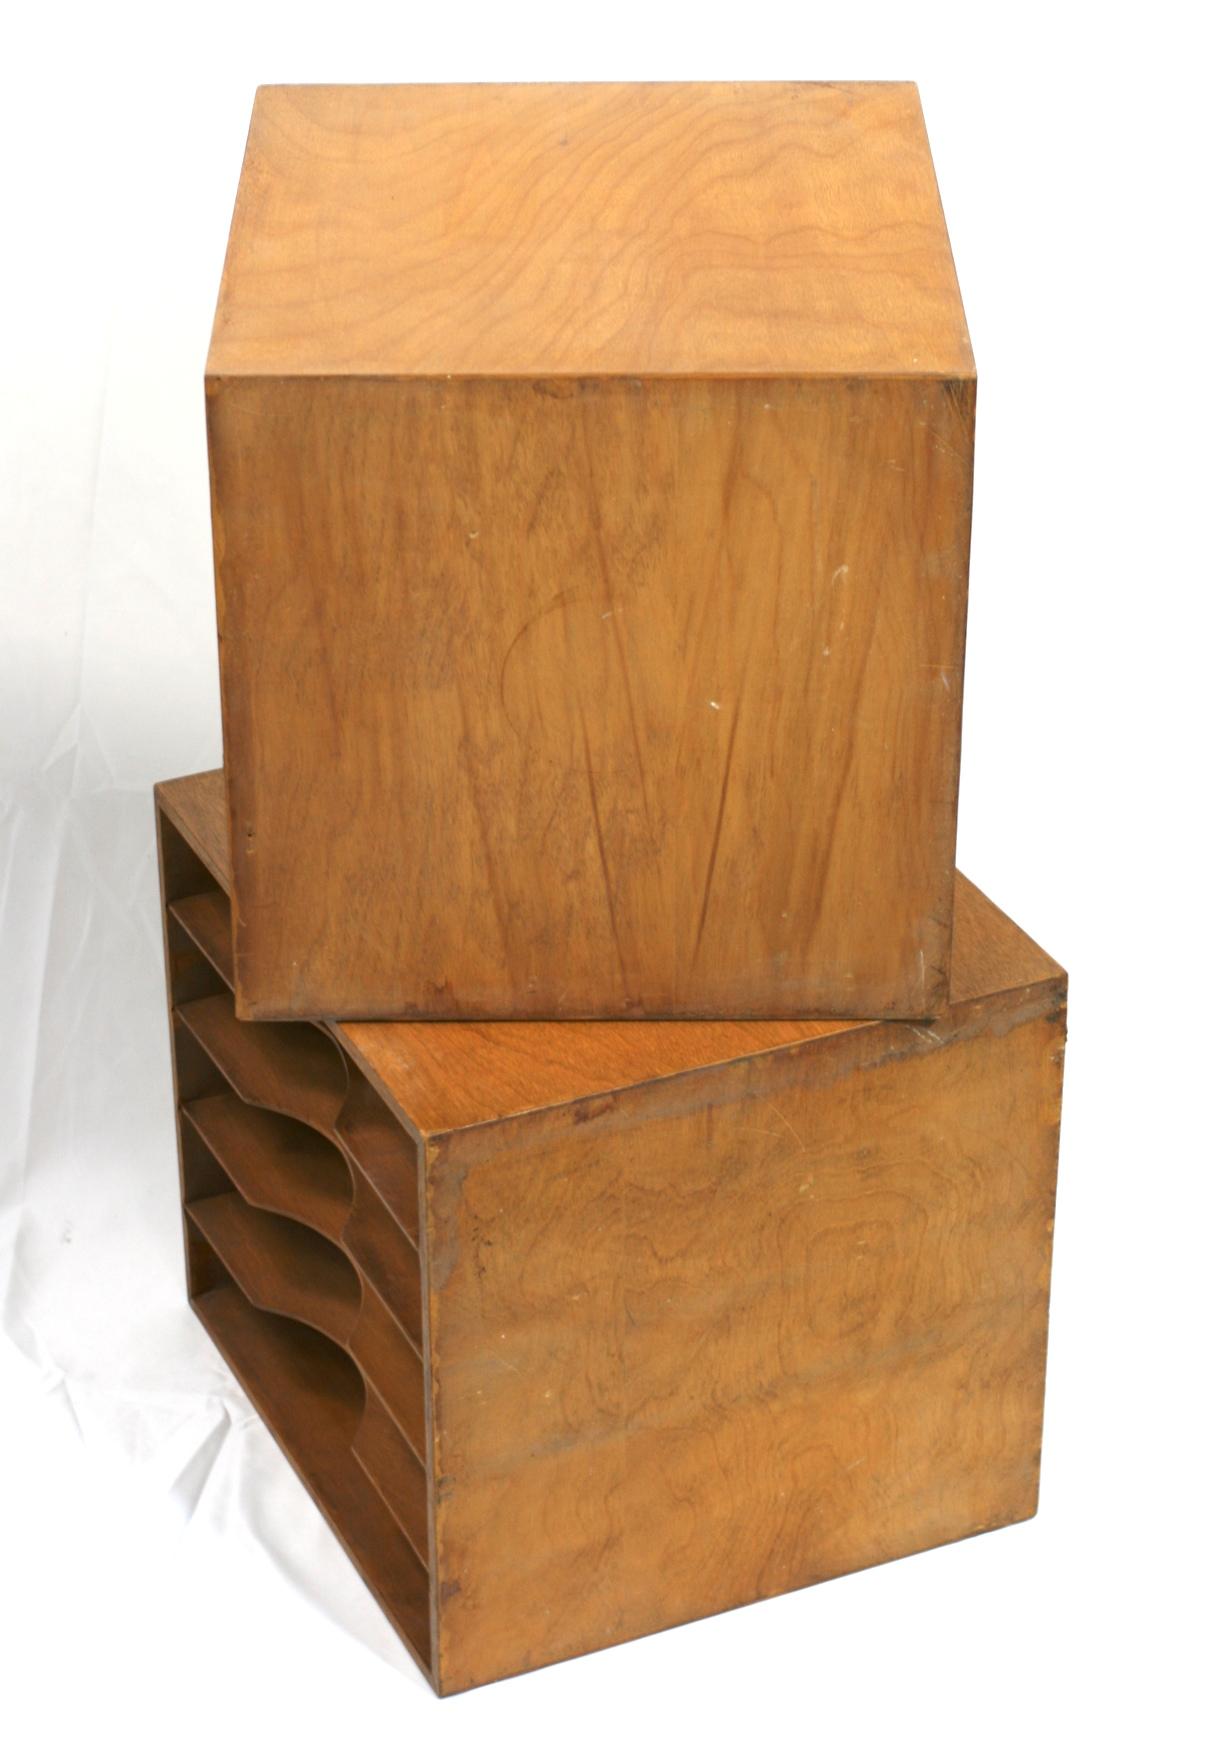 Mid-20th Century Art Deco Wood Filing Boxes